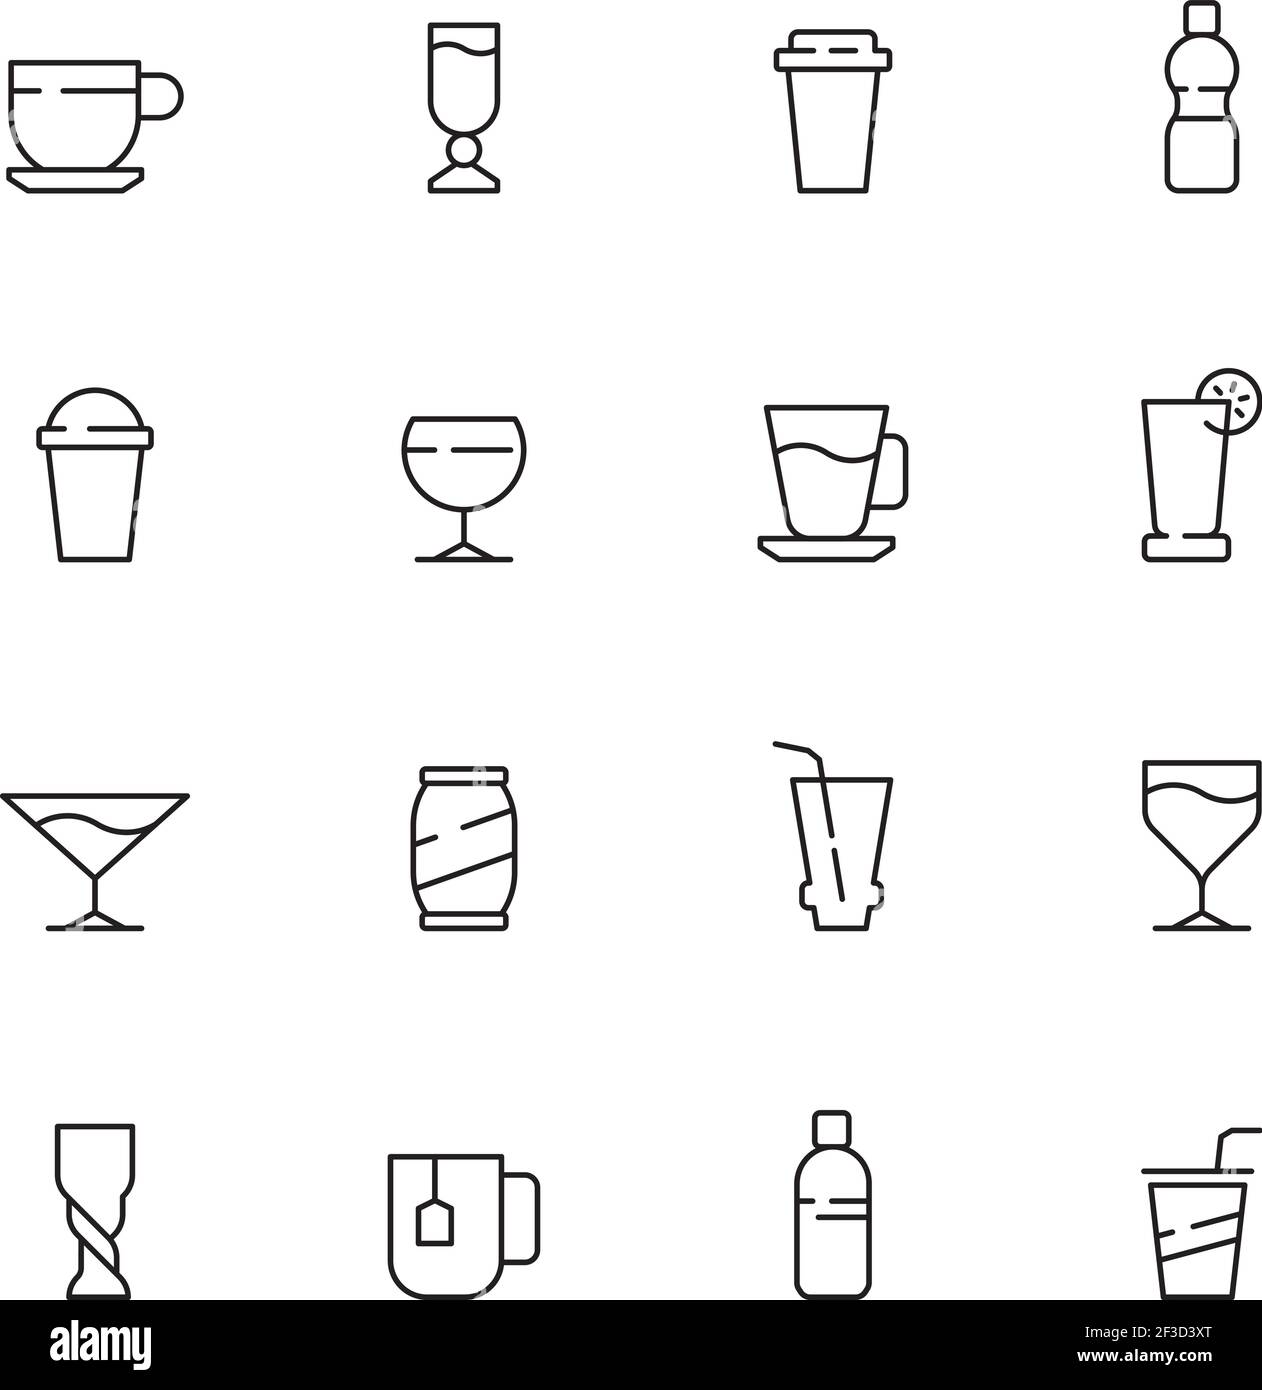 Drinks icon. Tea coffee water cold and hot drinks in cups and glasses vector symbols Stock Vector